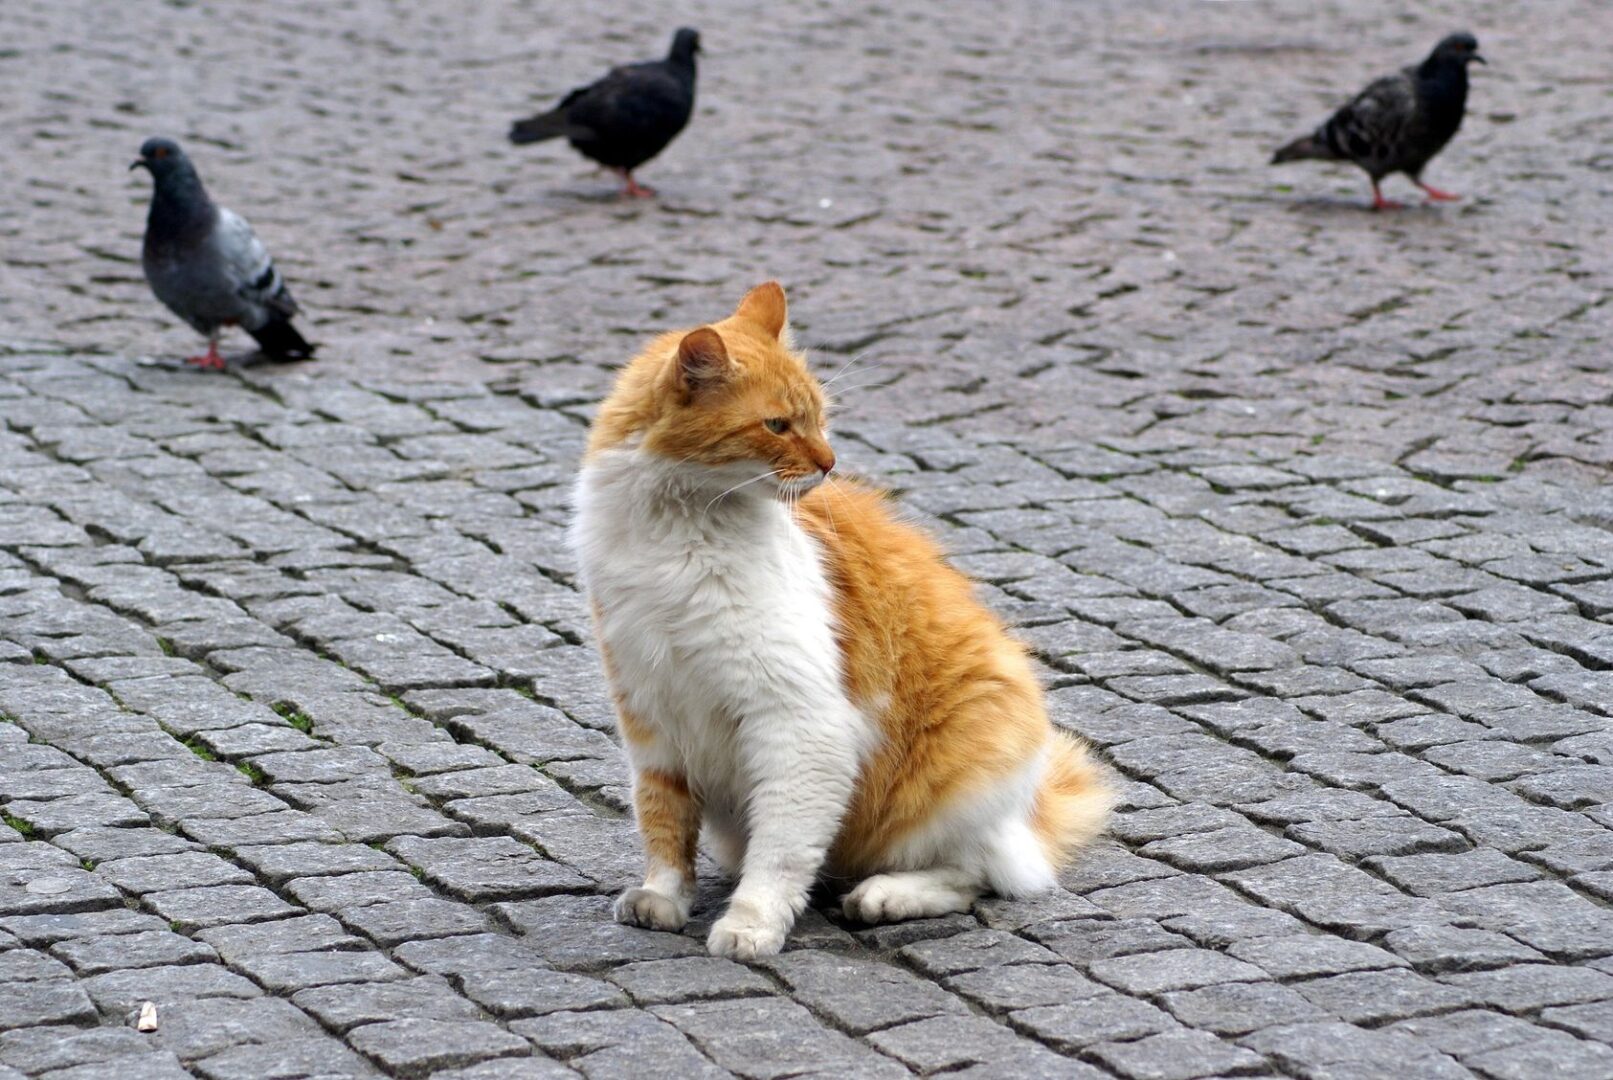 A cat sitting on the ground next to pigeons.